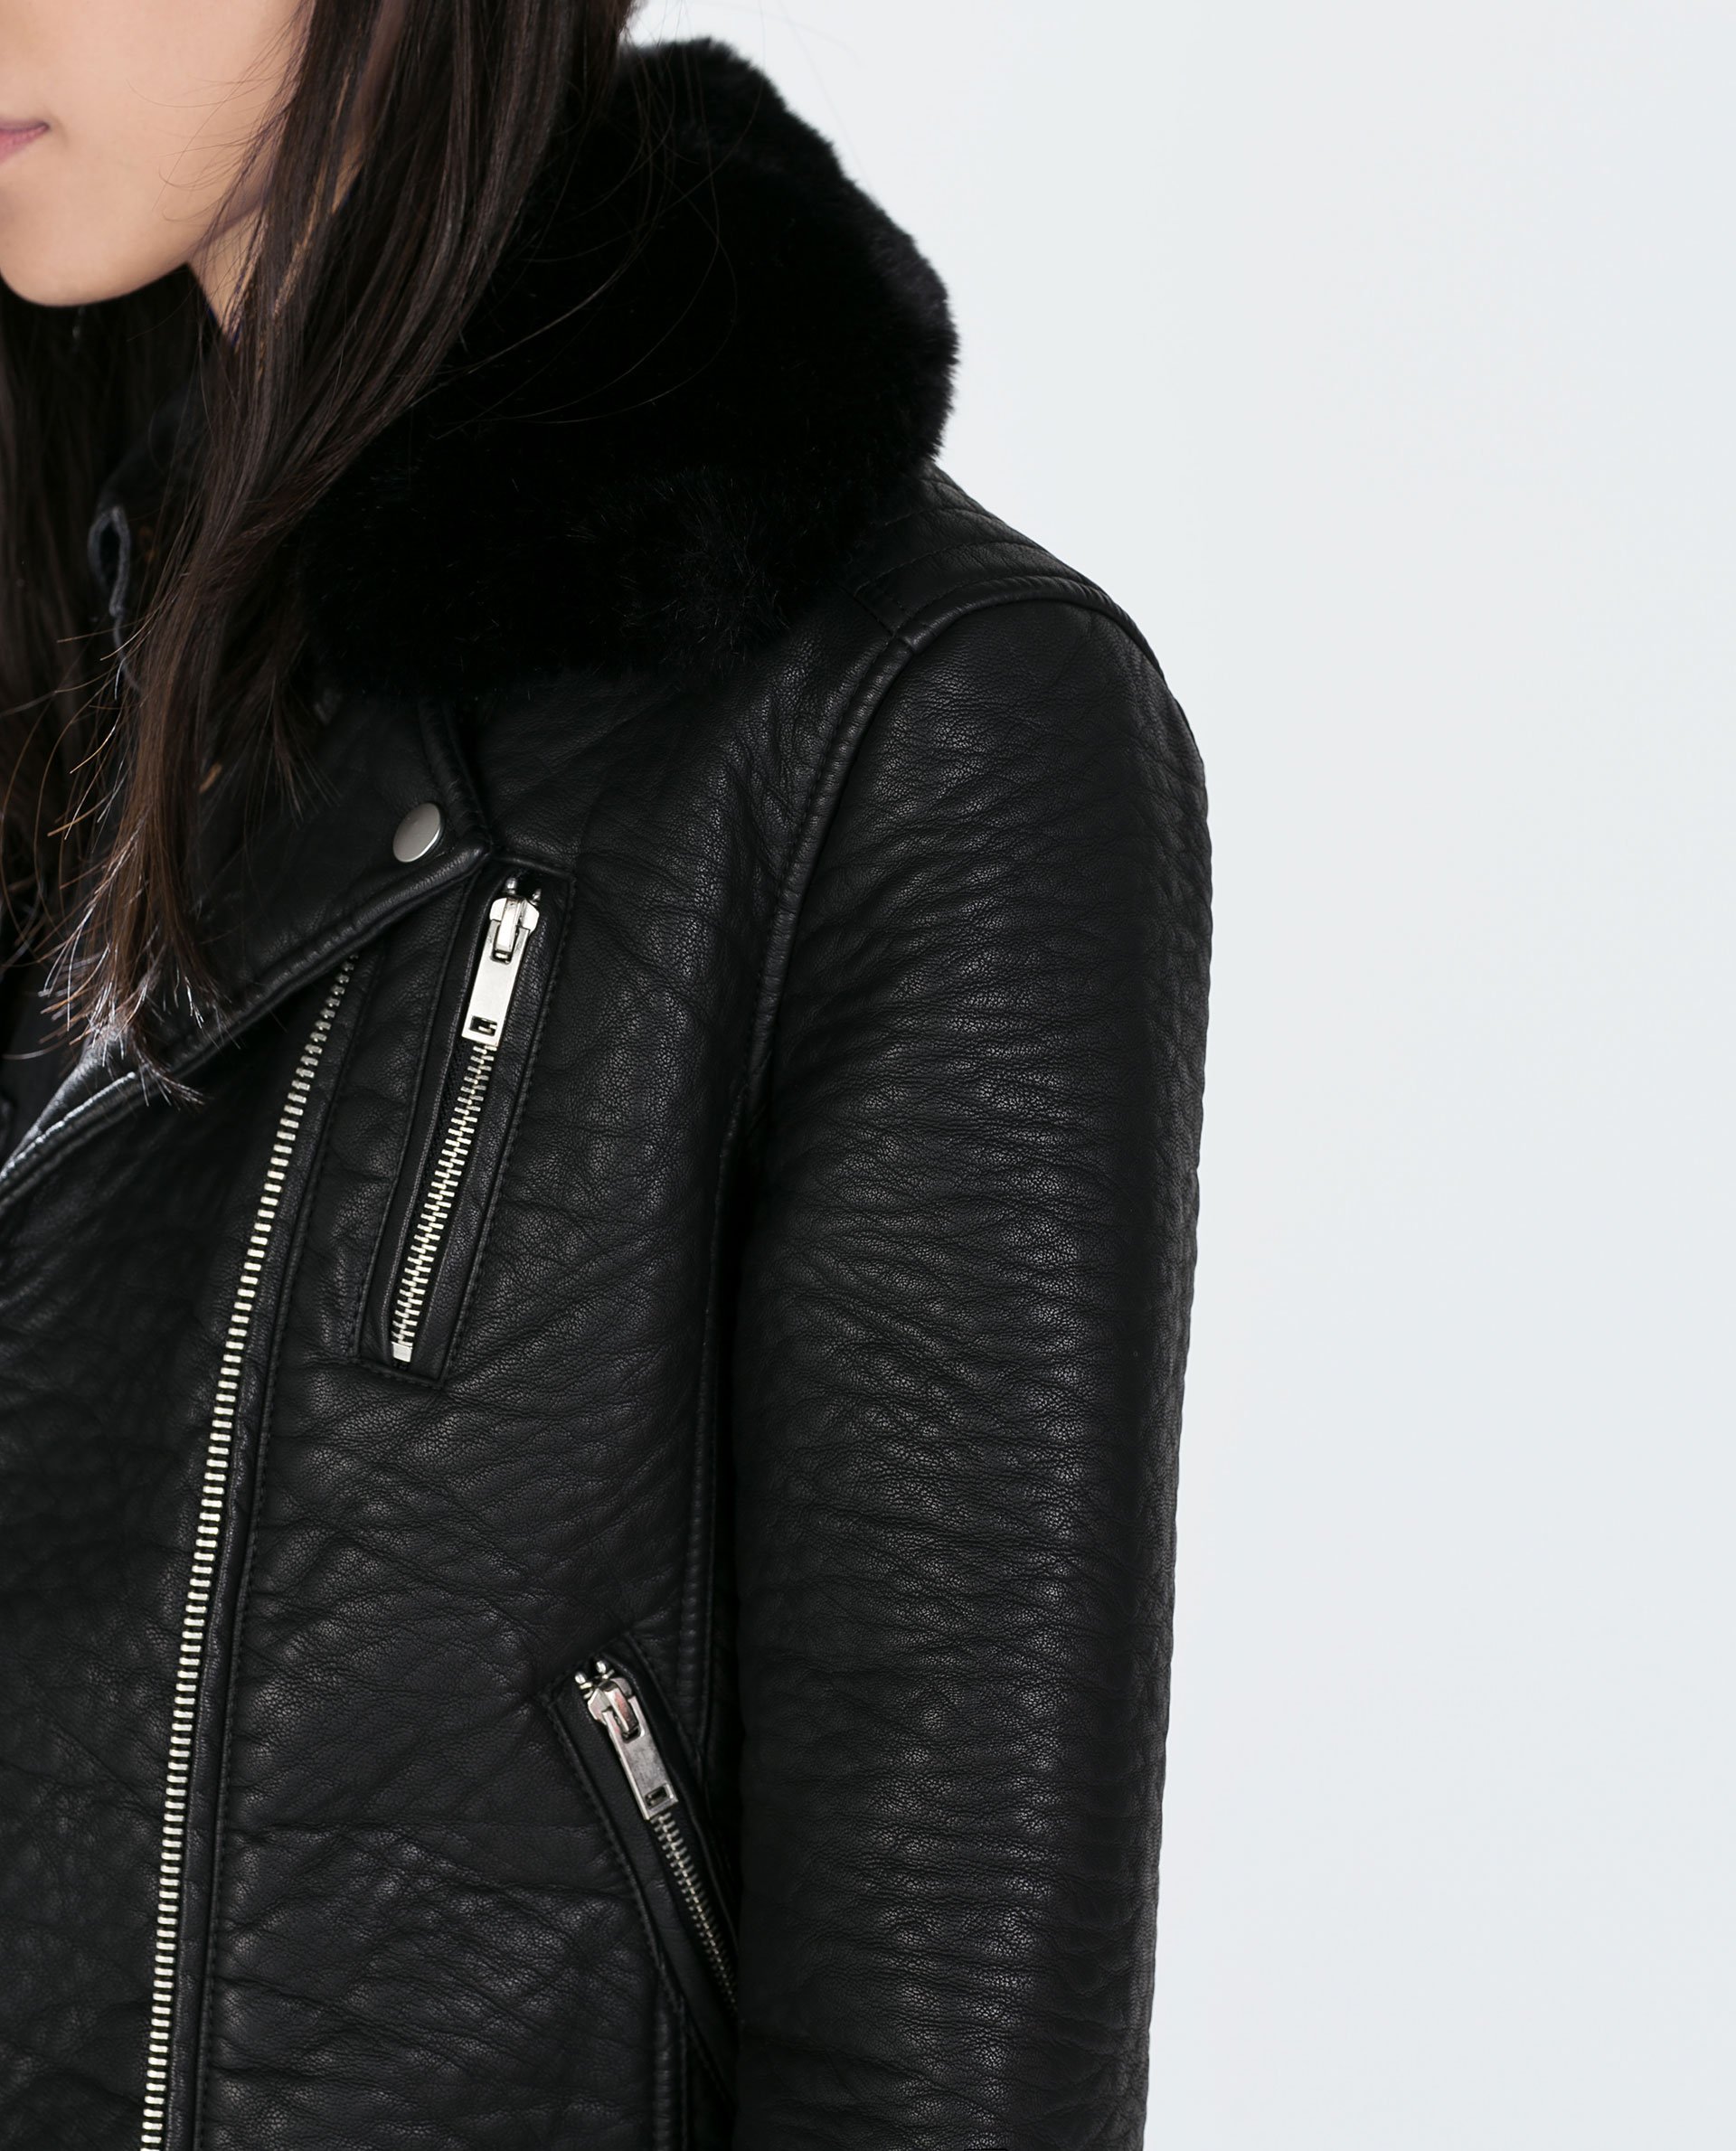 leather jacket with black fur collar | Gommap Blog